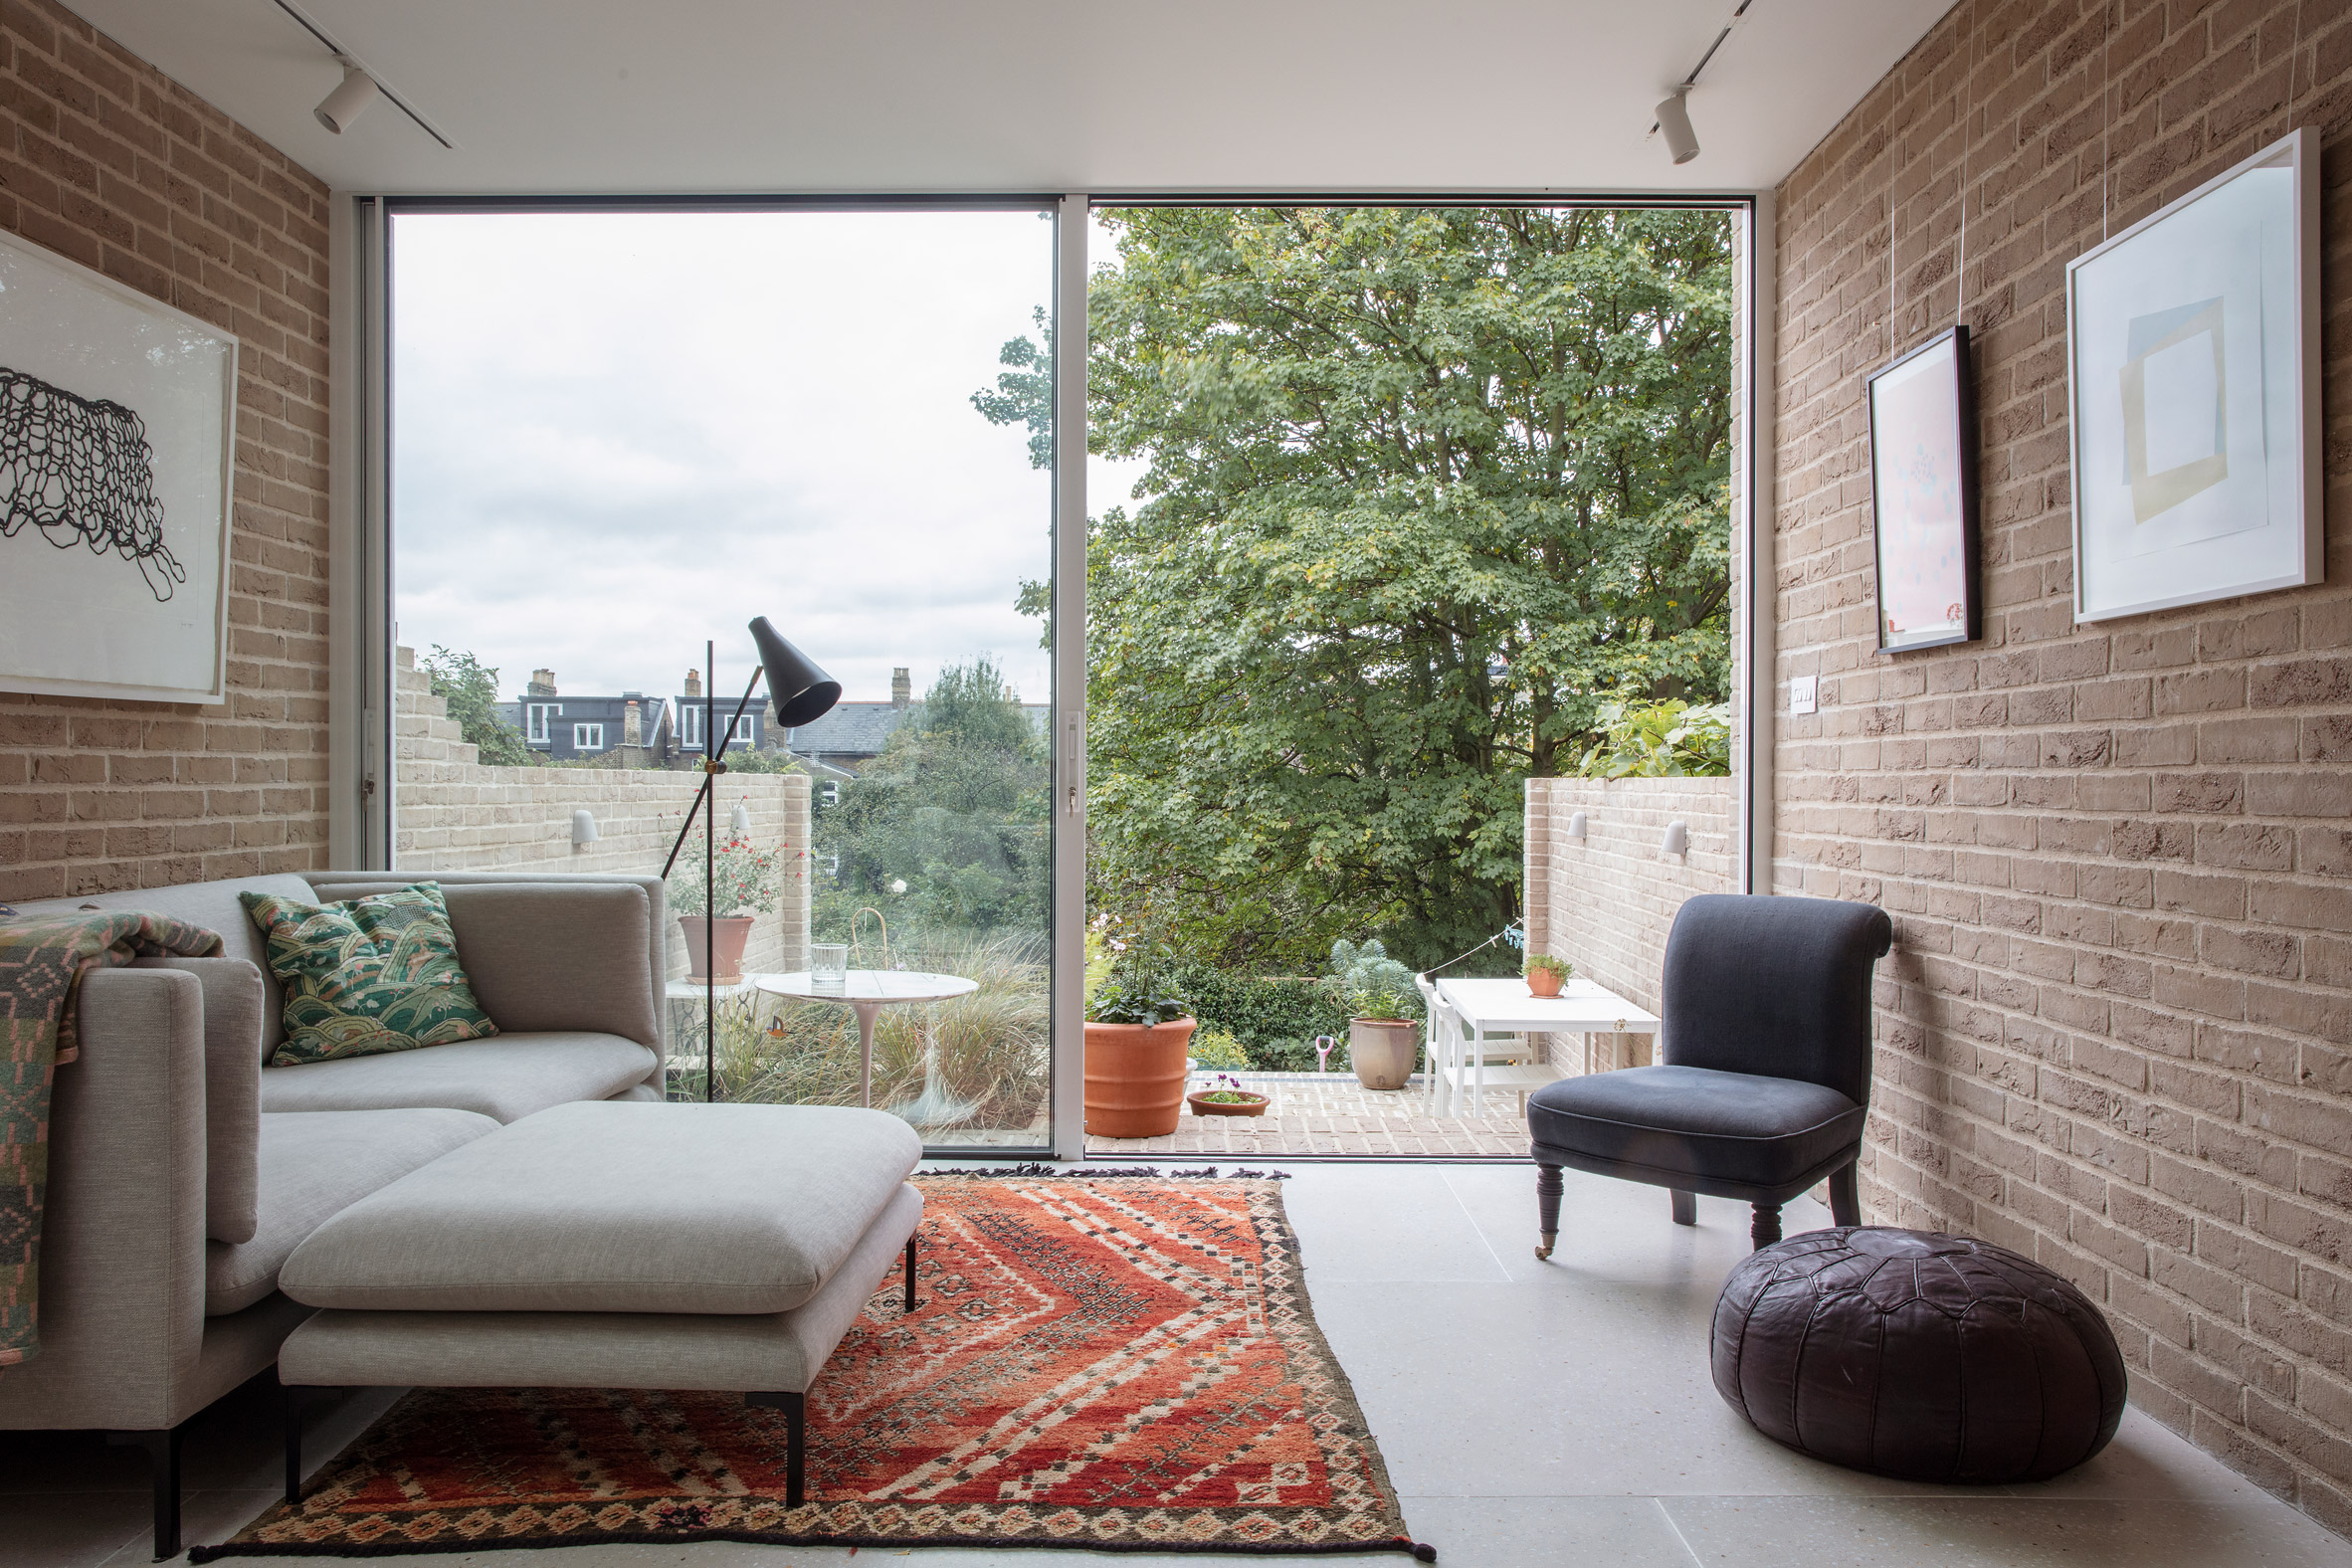 Image of the lounge area that leads out to a sunken garden at the london house extension and gallery